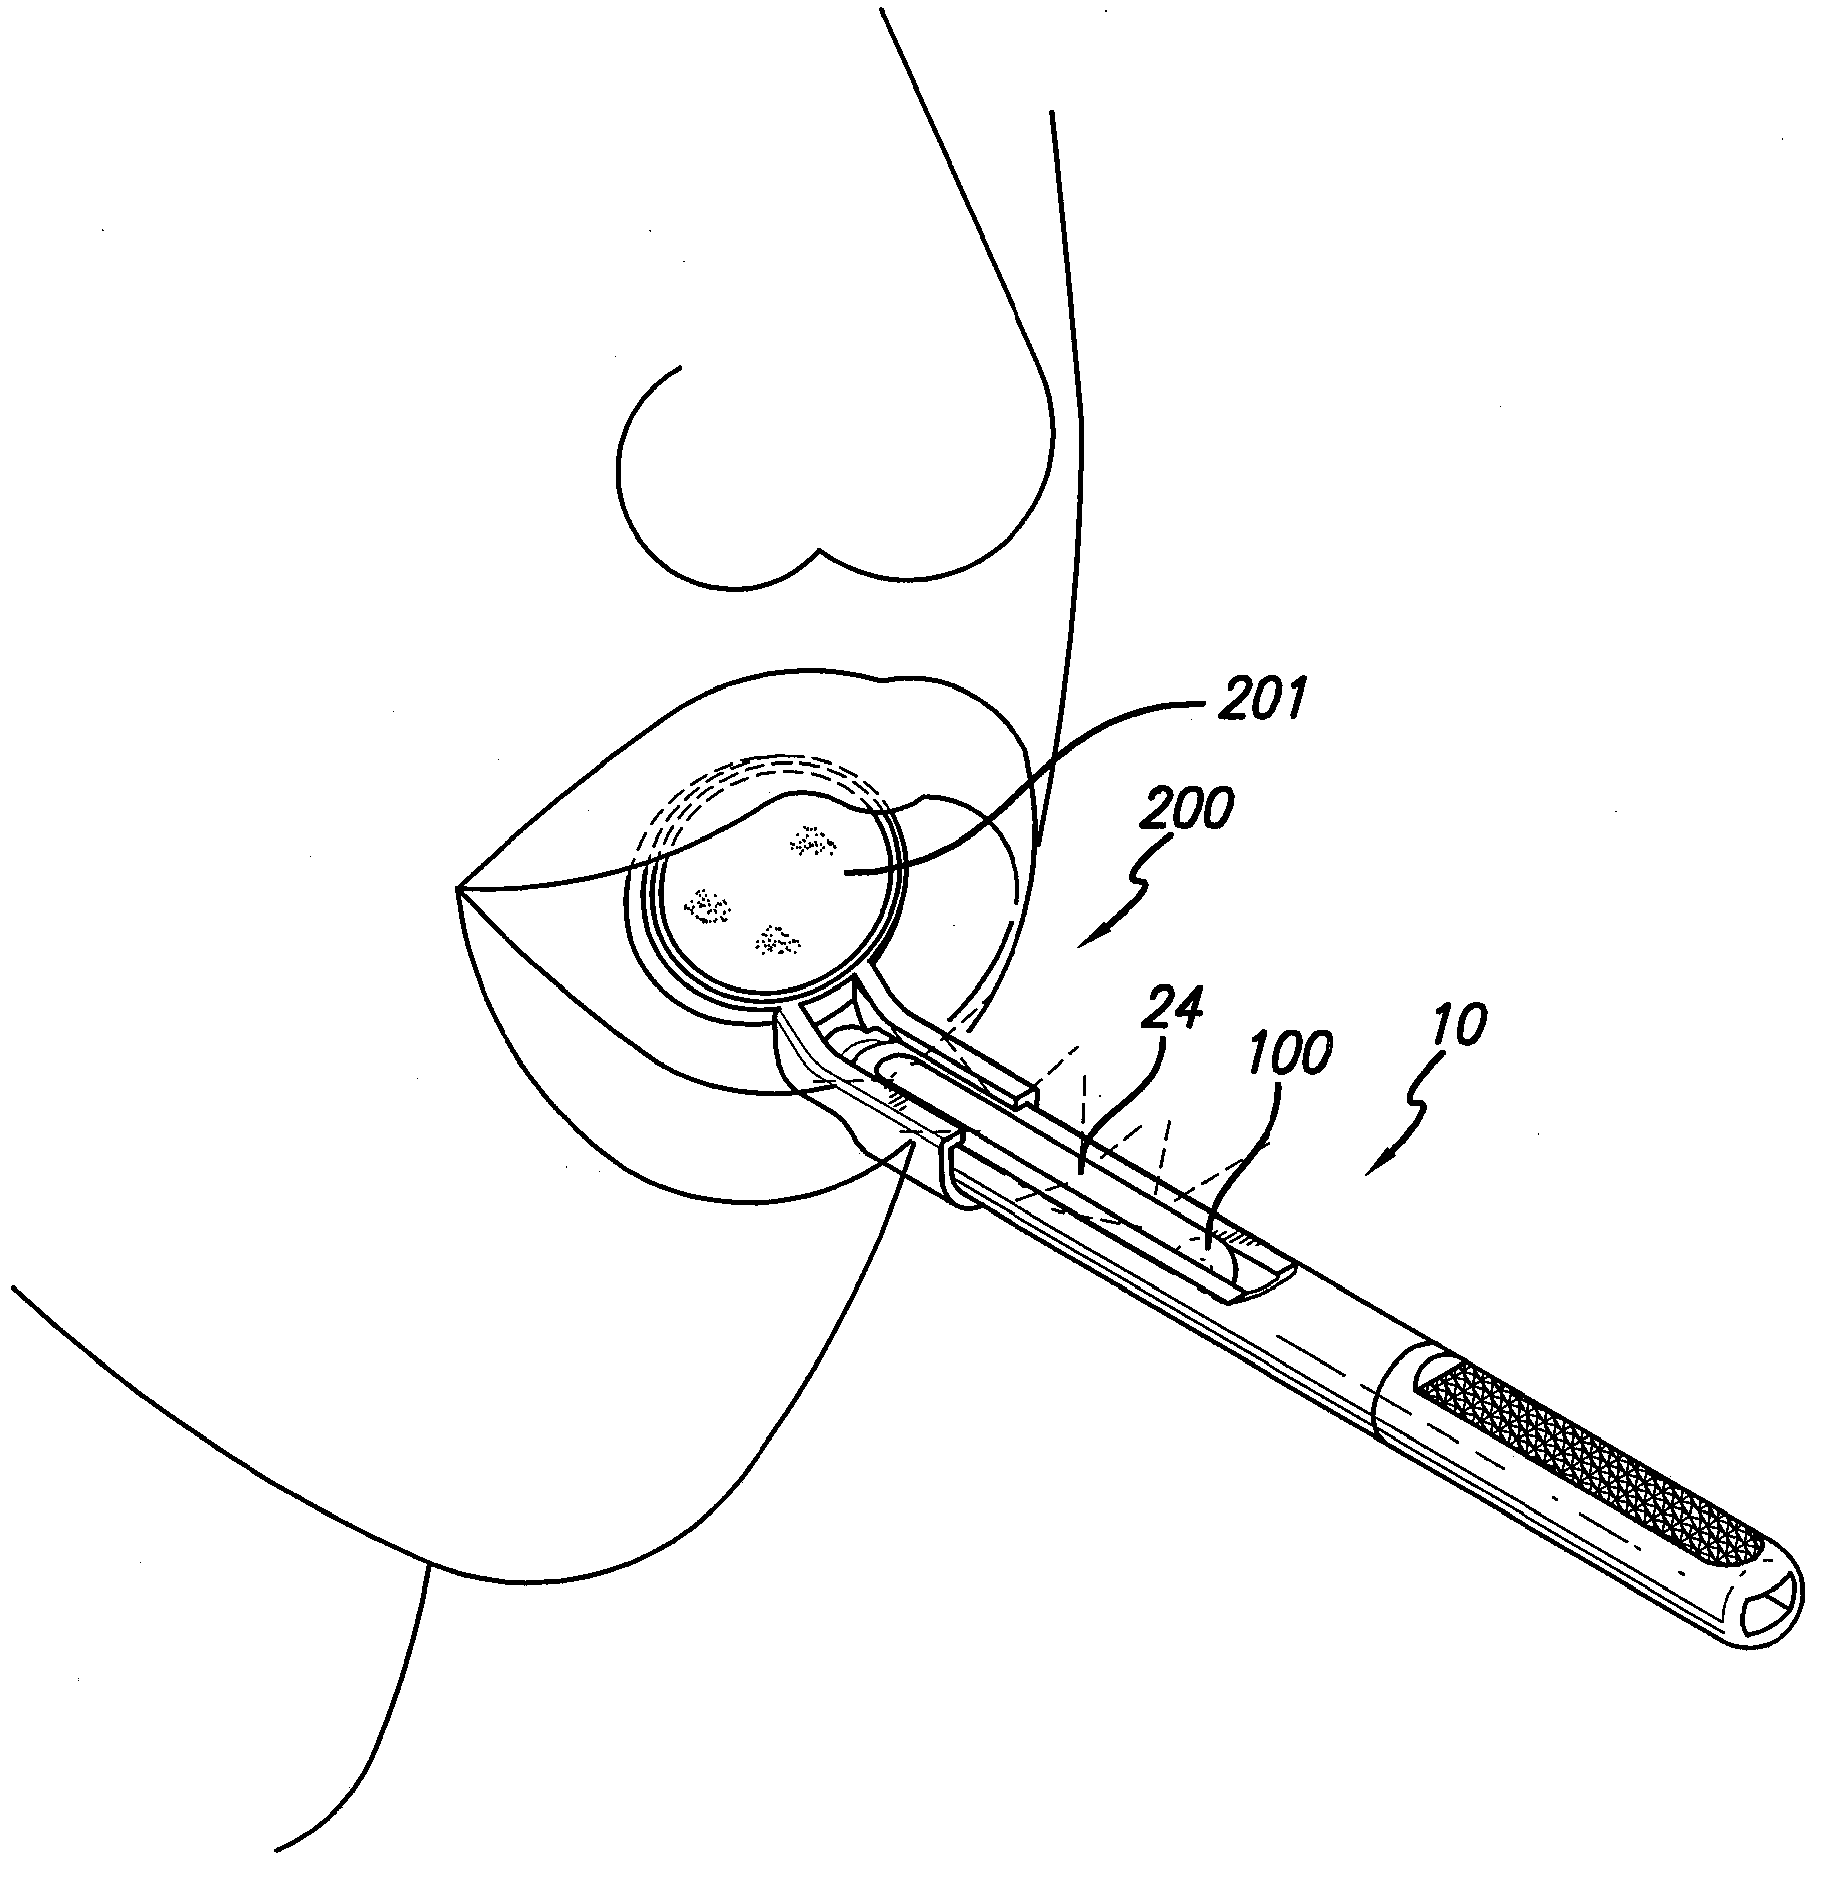 Device for oral cavity examination